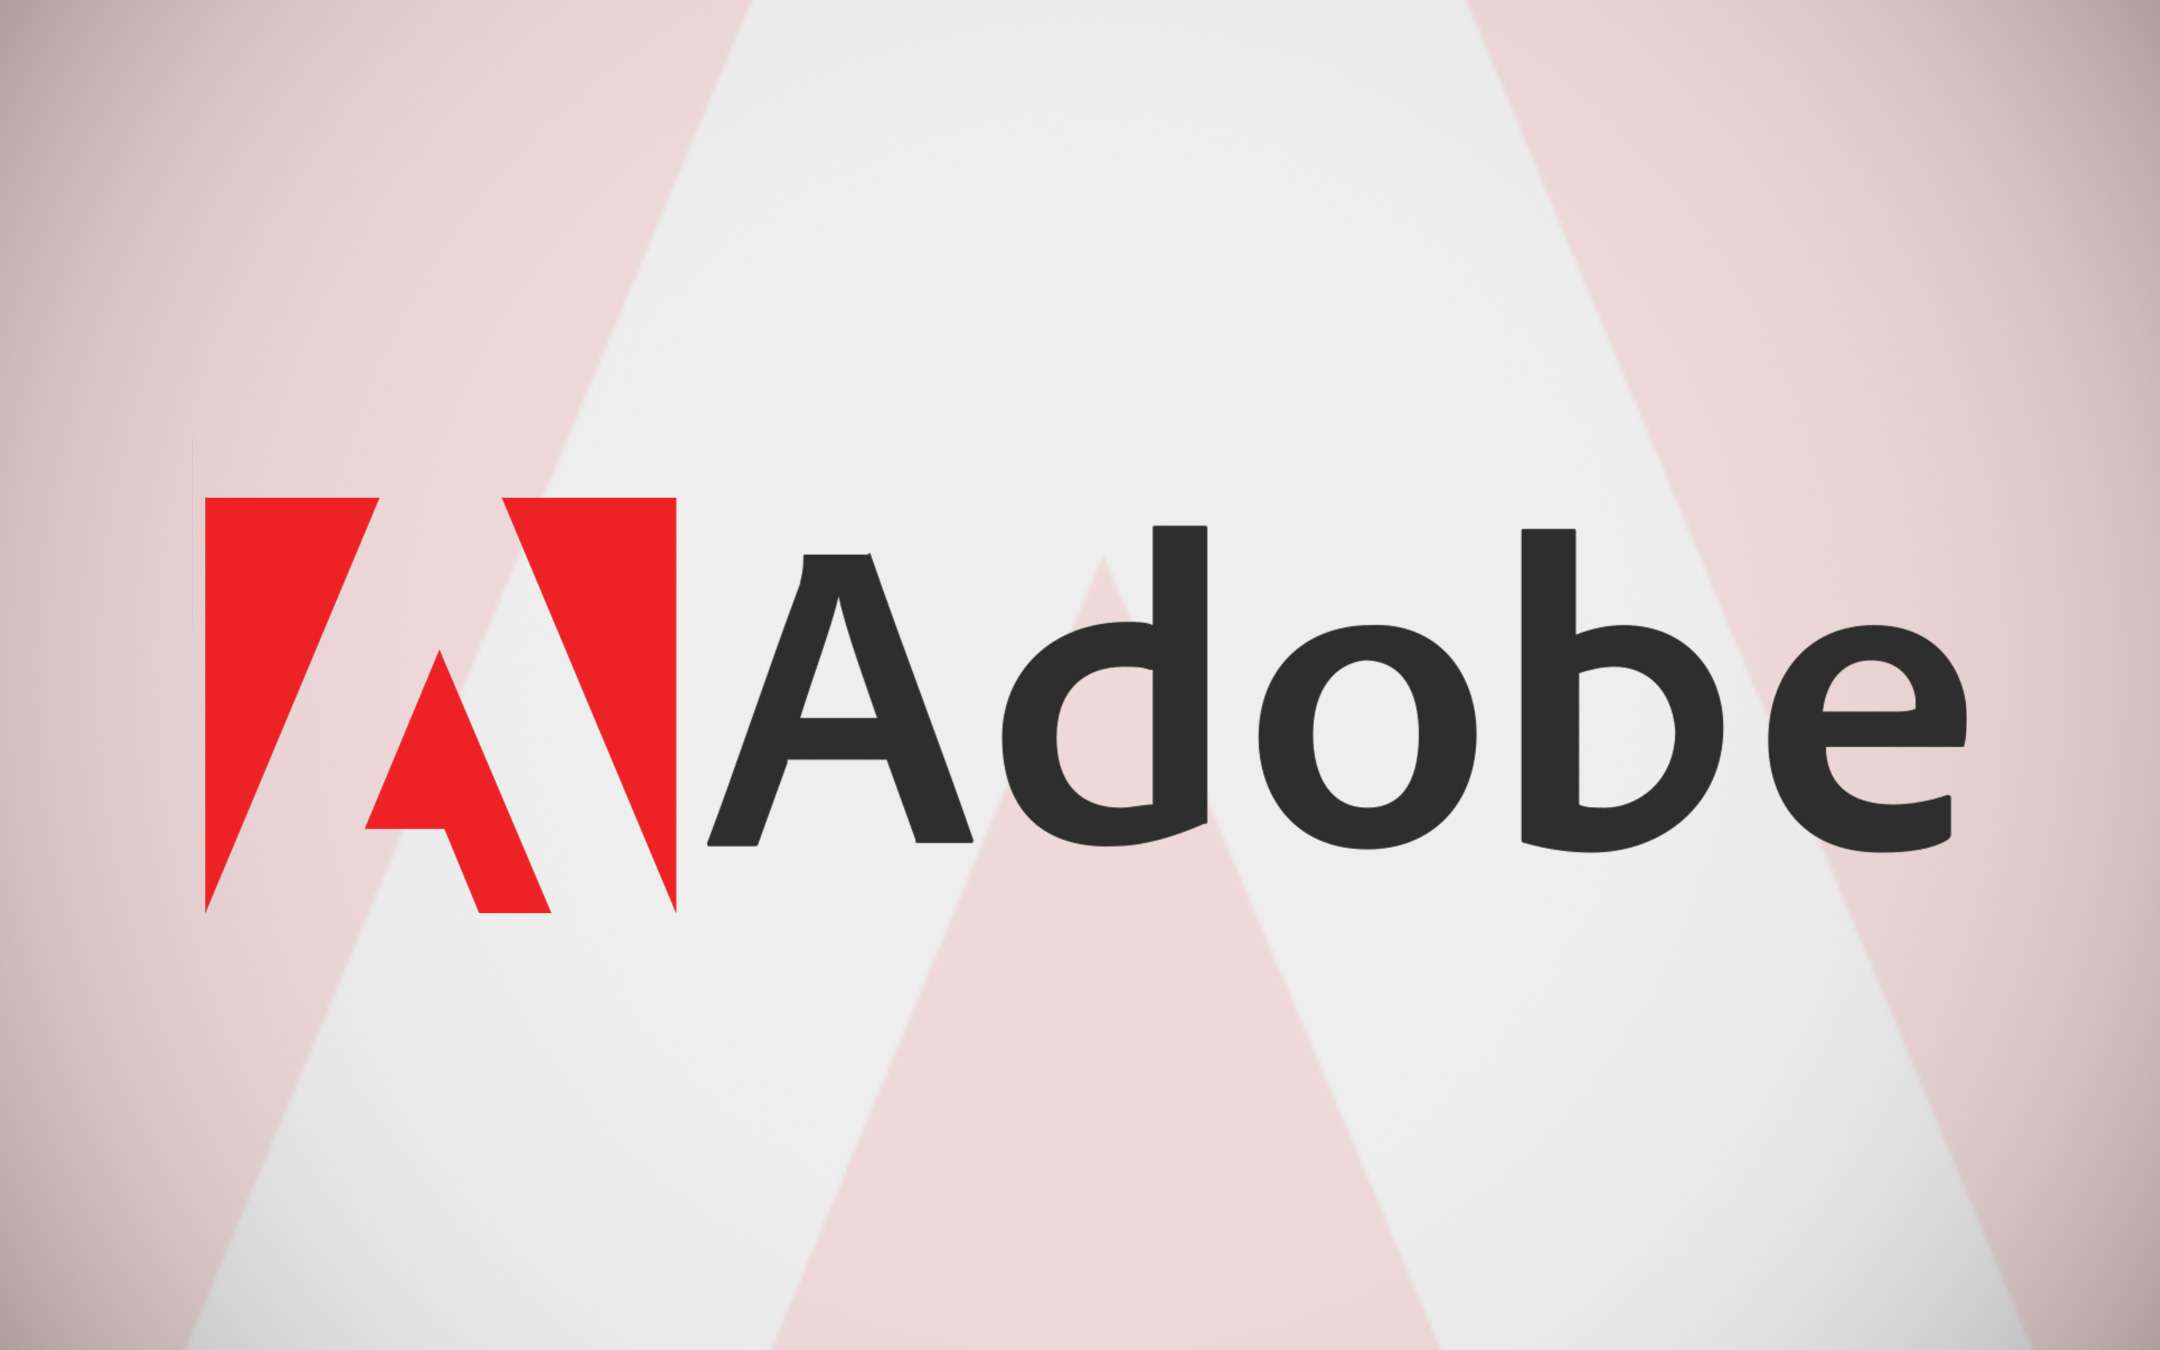 Adobe with IBM and Red Hat for marketing